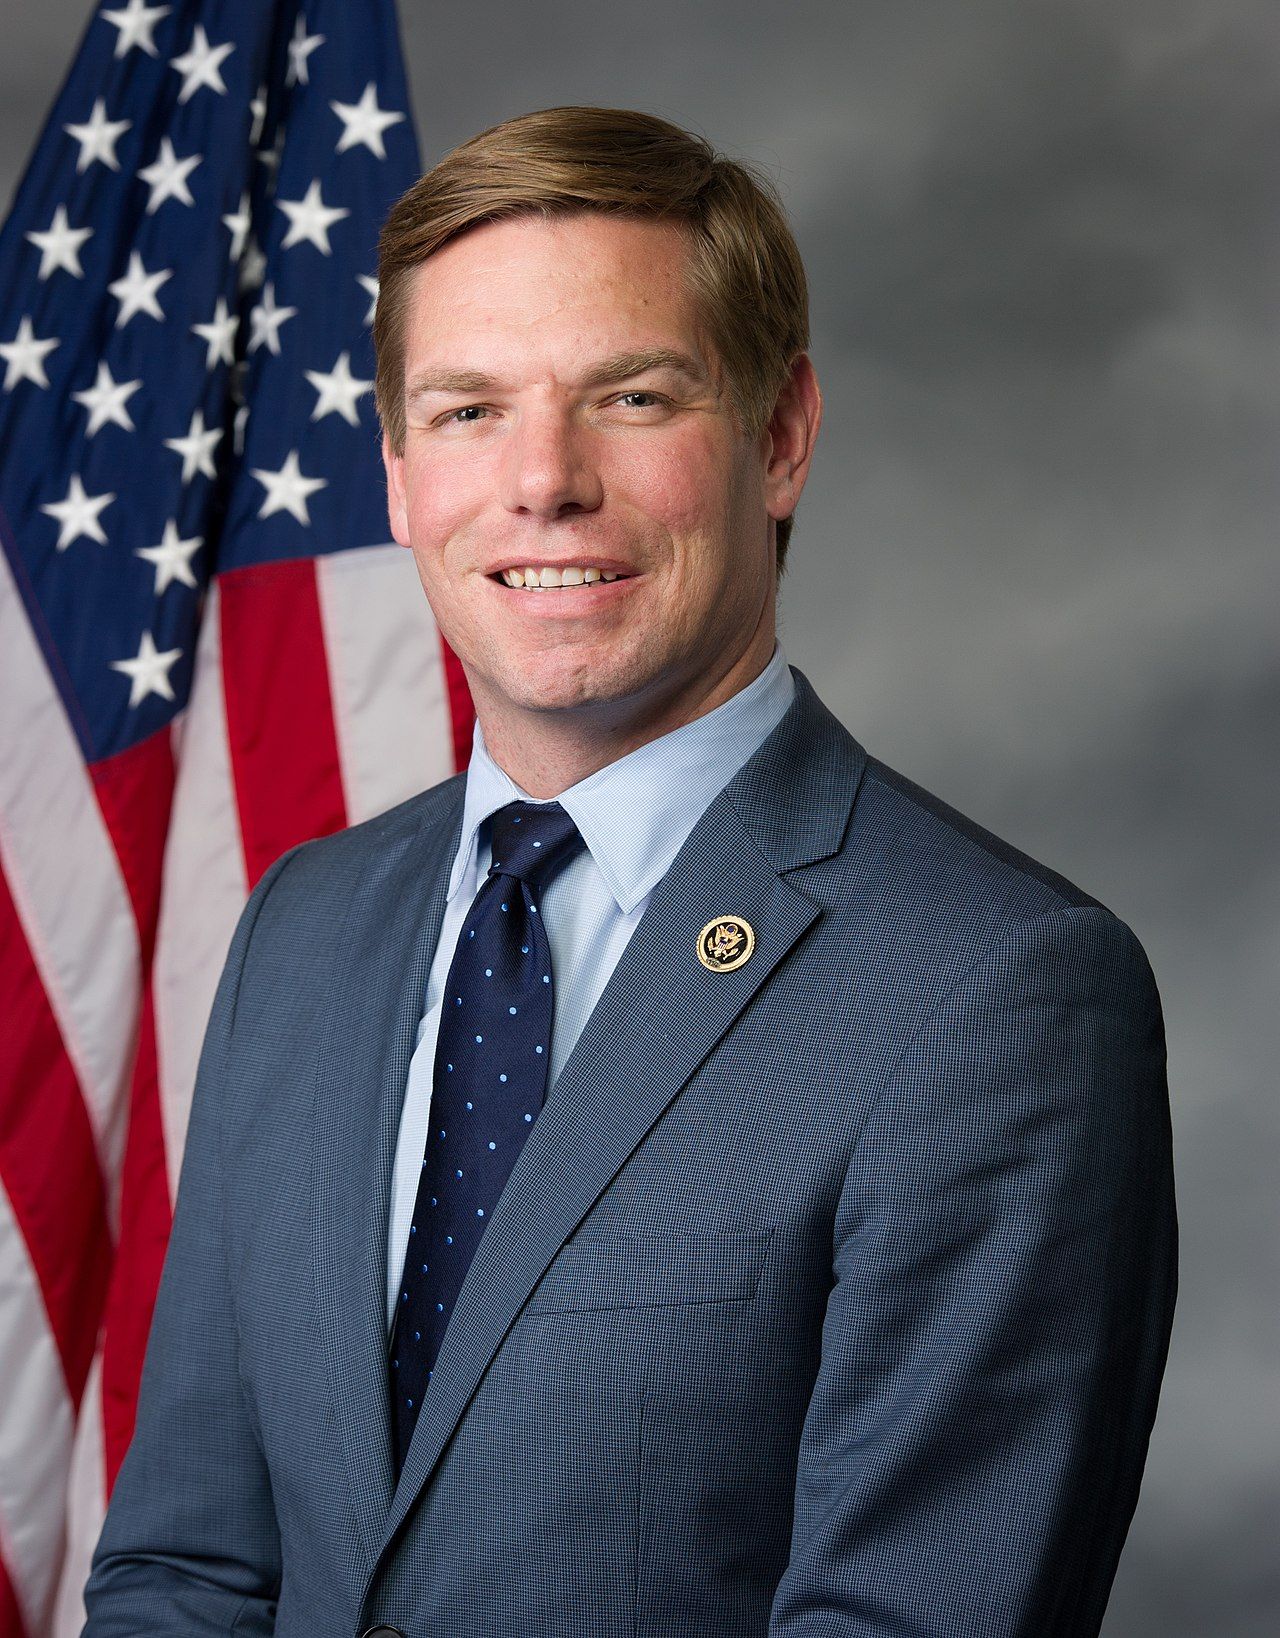 Man Down: Eric Swalwell (Who?) is first candidate to drop out of Democratic Primary | 2020